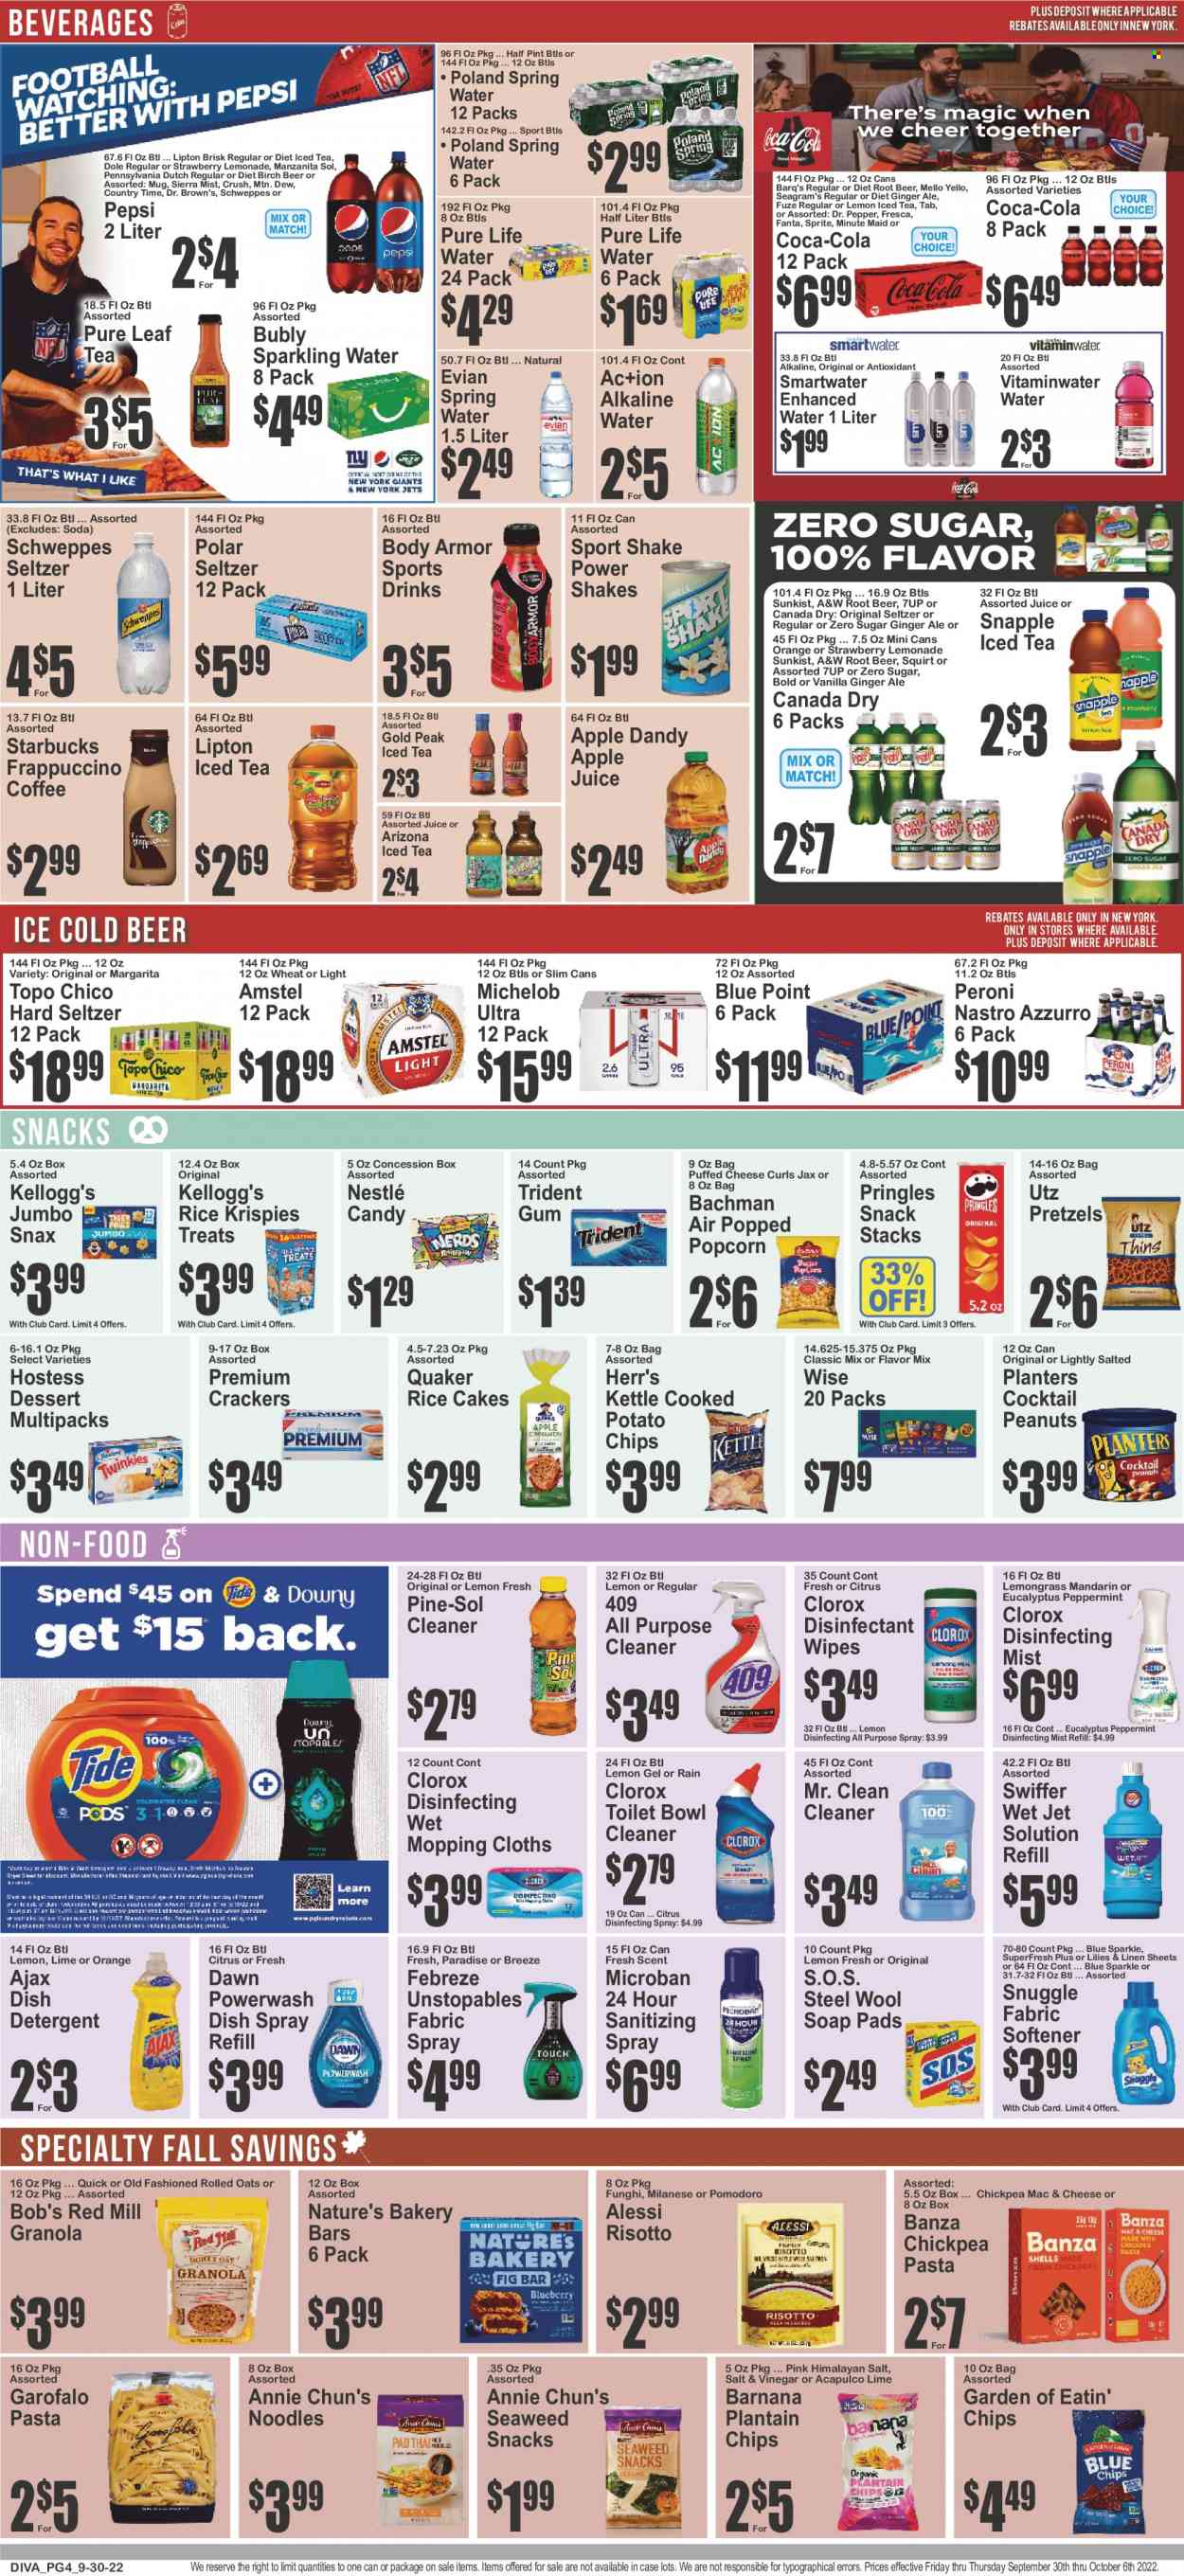 thumbnail - Key Food Flyer - 09/30/2022 - 10/06/2022 - Sales products - pretzels, Dole, mandarines, oranges, risotto, pasta, Quaker, noodles, shake, Nestlé, snack, crackers, Kellogg's, Trident, potato chips, Pringles, chips, popcorn, oats, granola, rolled oats, Rice Krispies, peanuts, Planters, apple juice, Canada Dry, Coca-Cola, ginger ale, lemonade, Mountain Dew, Schweppes, Sprite, Pepsi, juice, Fanta, Body Armor, Lipton, ice tea, Dr. Pepper, 7UP, AriZona, Snapple, Dr. Brown's, A&W, Sierra Mist, Country Time, fruit punch, spring water, soda, sparkling water, Pure Life Water, Smartwater, alkaline water, Evian, Pure Leaf, coffee, Starbucks, frappuccino, Hard Seltzer, beer, Peroni, wipes, detergent, Febreze, cleaner, desinfection, all purpose cleaner, Clorox, Ajax, Pine-Sol, Swiffer, Snuggle, Unstopables, fabric softener, dishwasher cleaner, Jet, soap, mug, Michelob. Page 5.